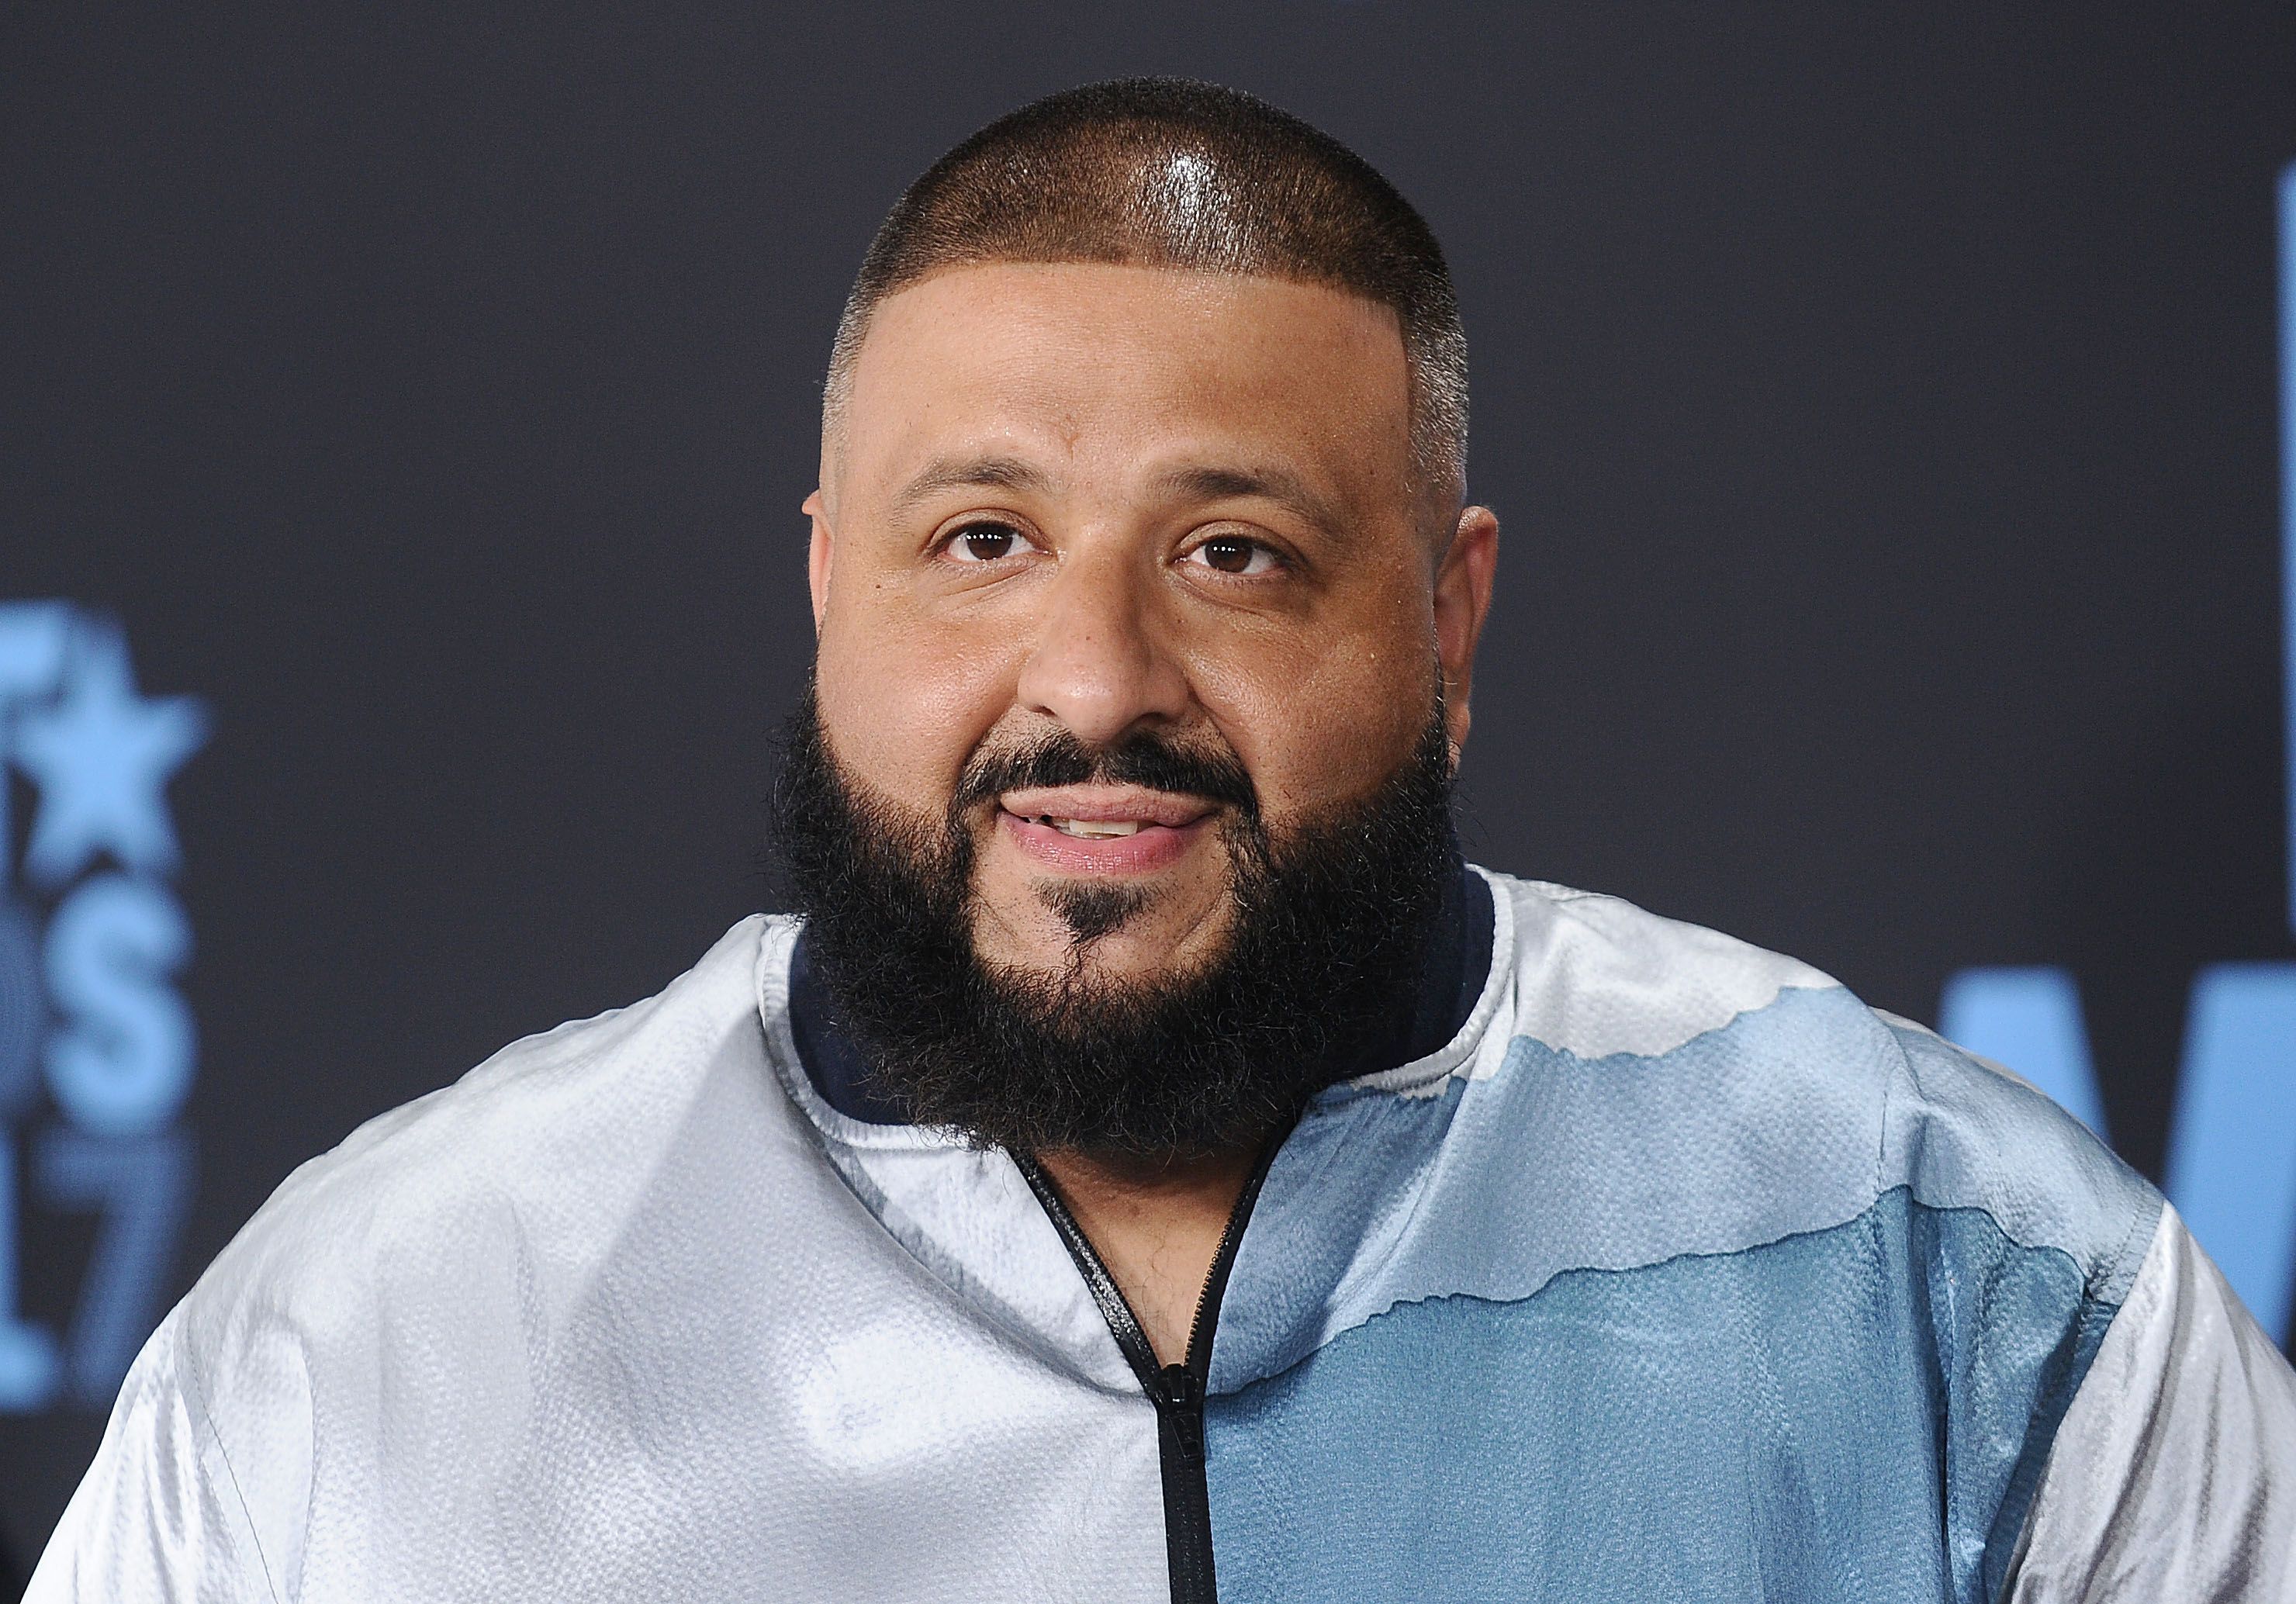 DJ Khaled attending the BET Awards in Los Angeles on June 25, 2017 | Photo: Getty Images